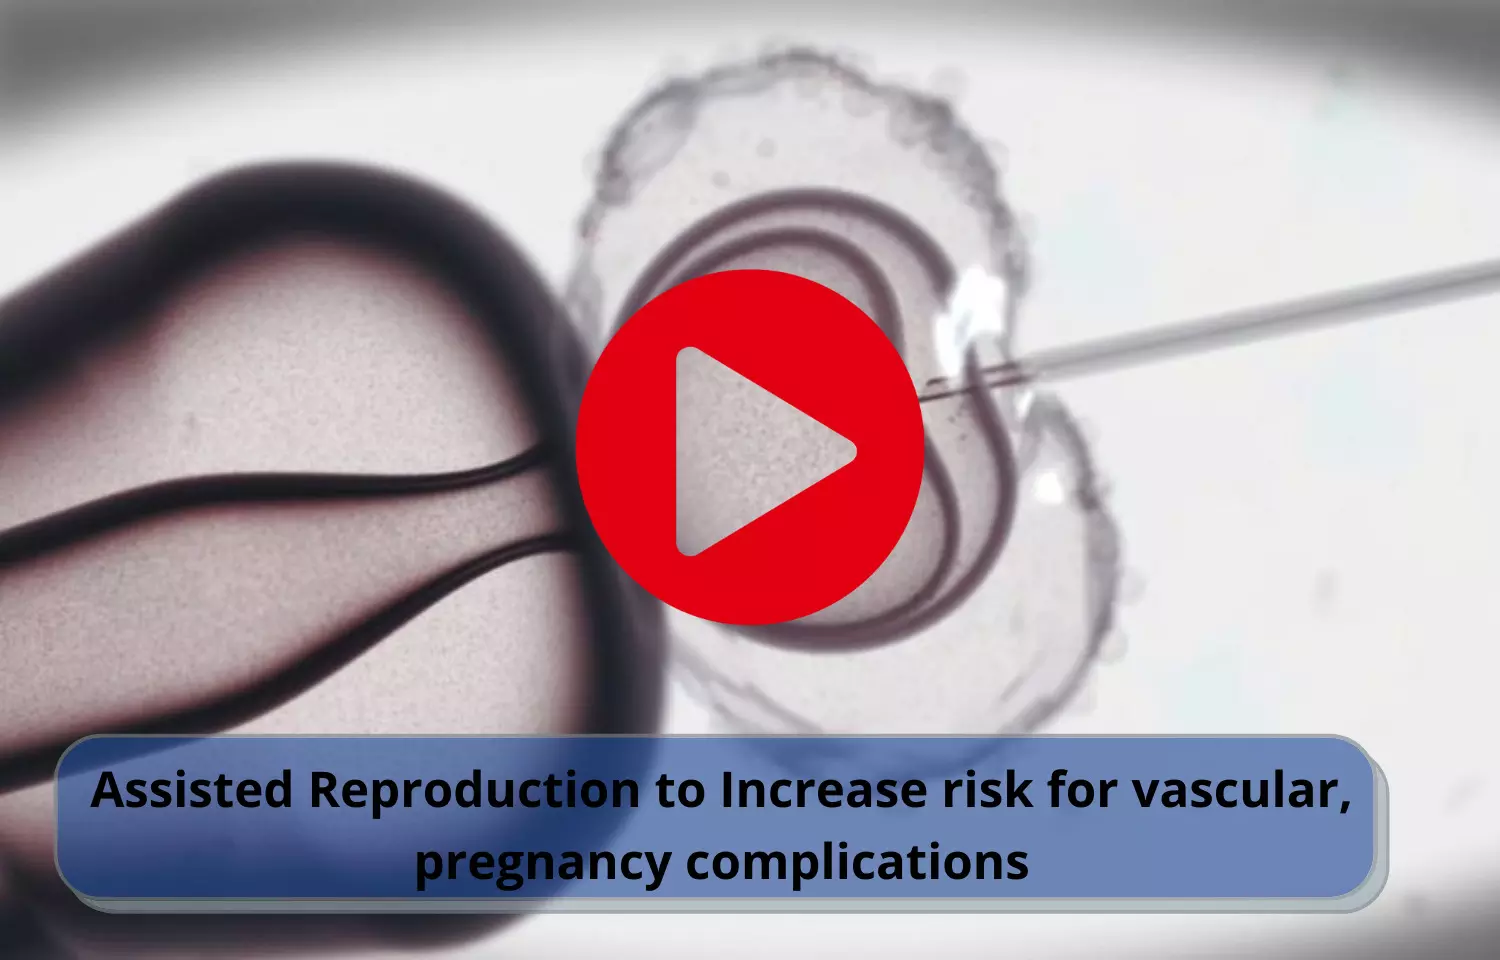 Assisted Reproduction to Increase vascular and pregnancy complications